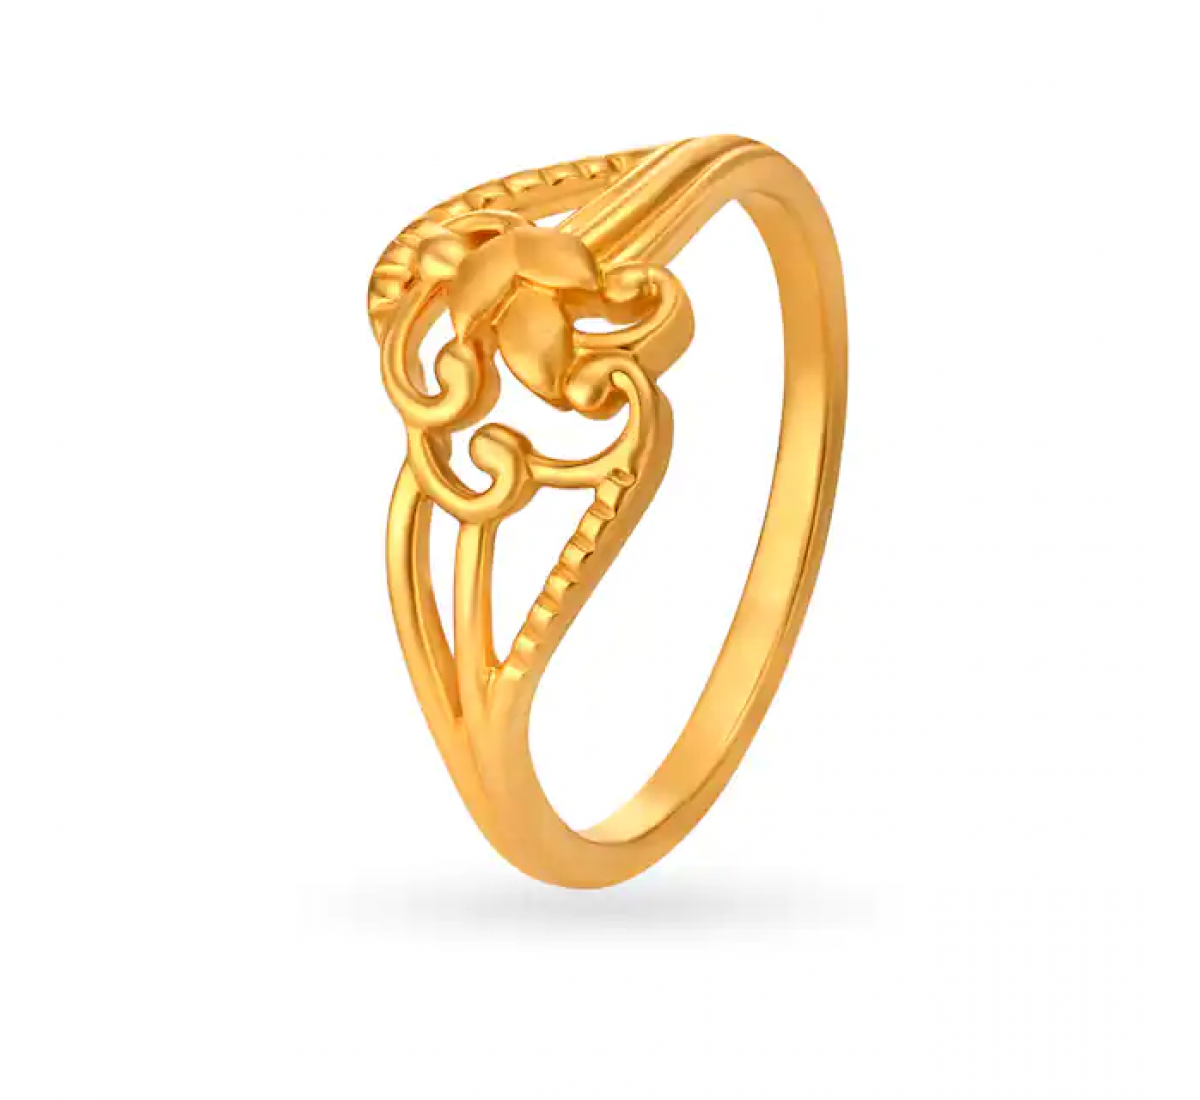 Charming Gold Floral Ring